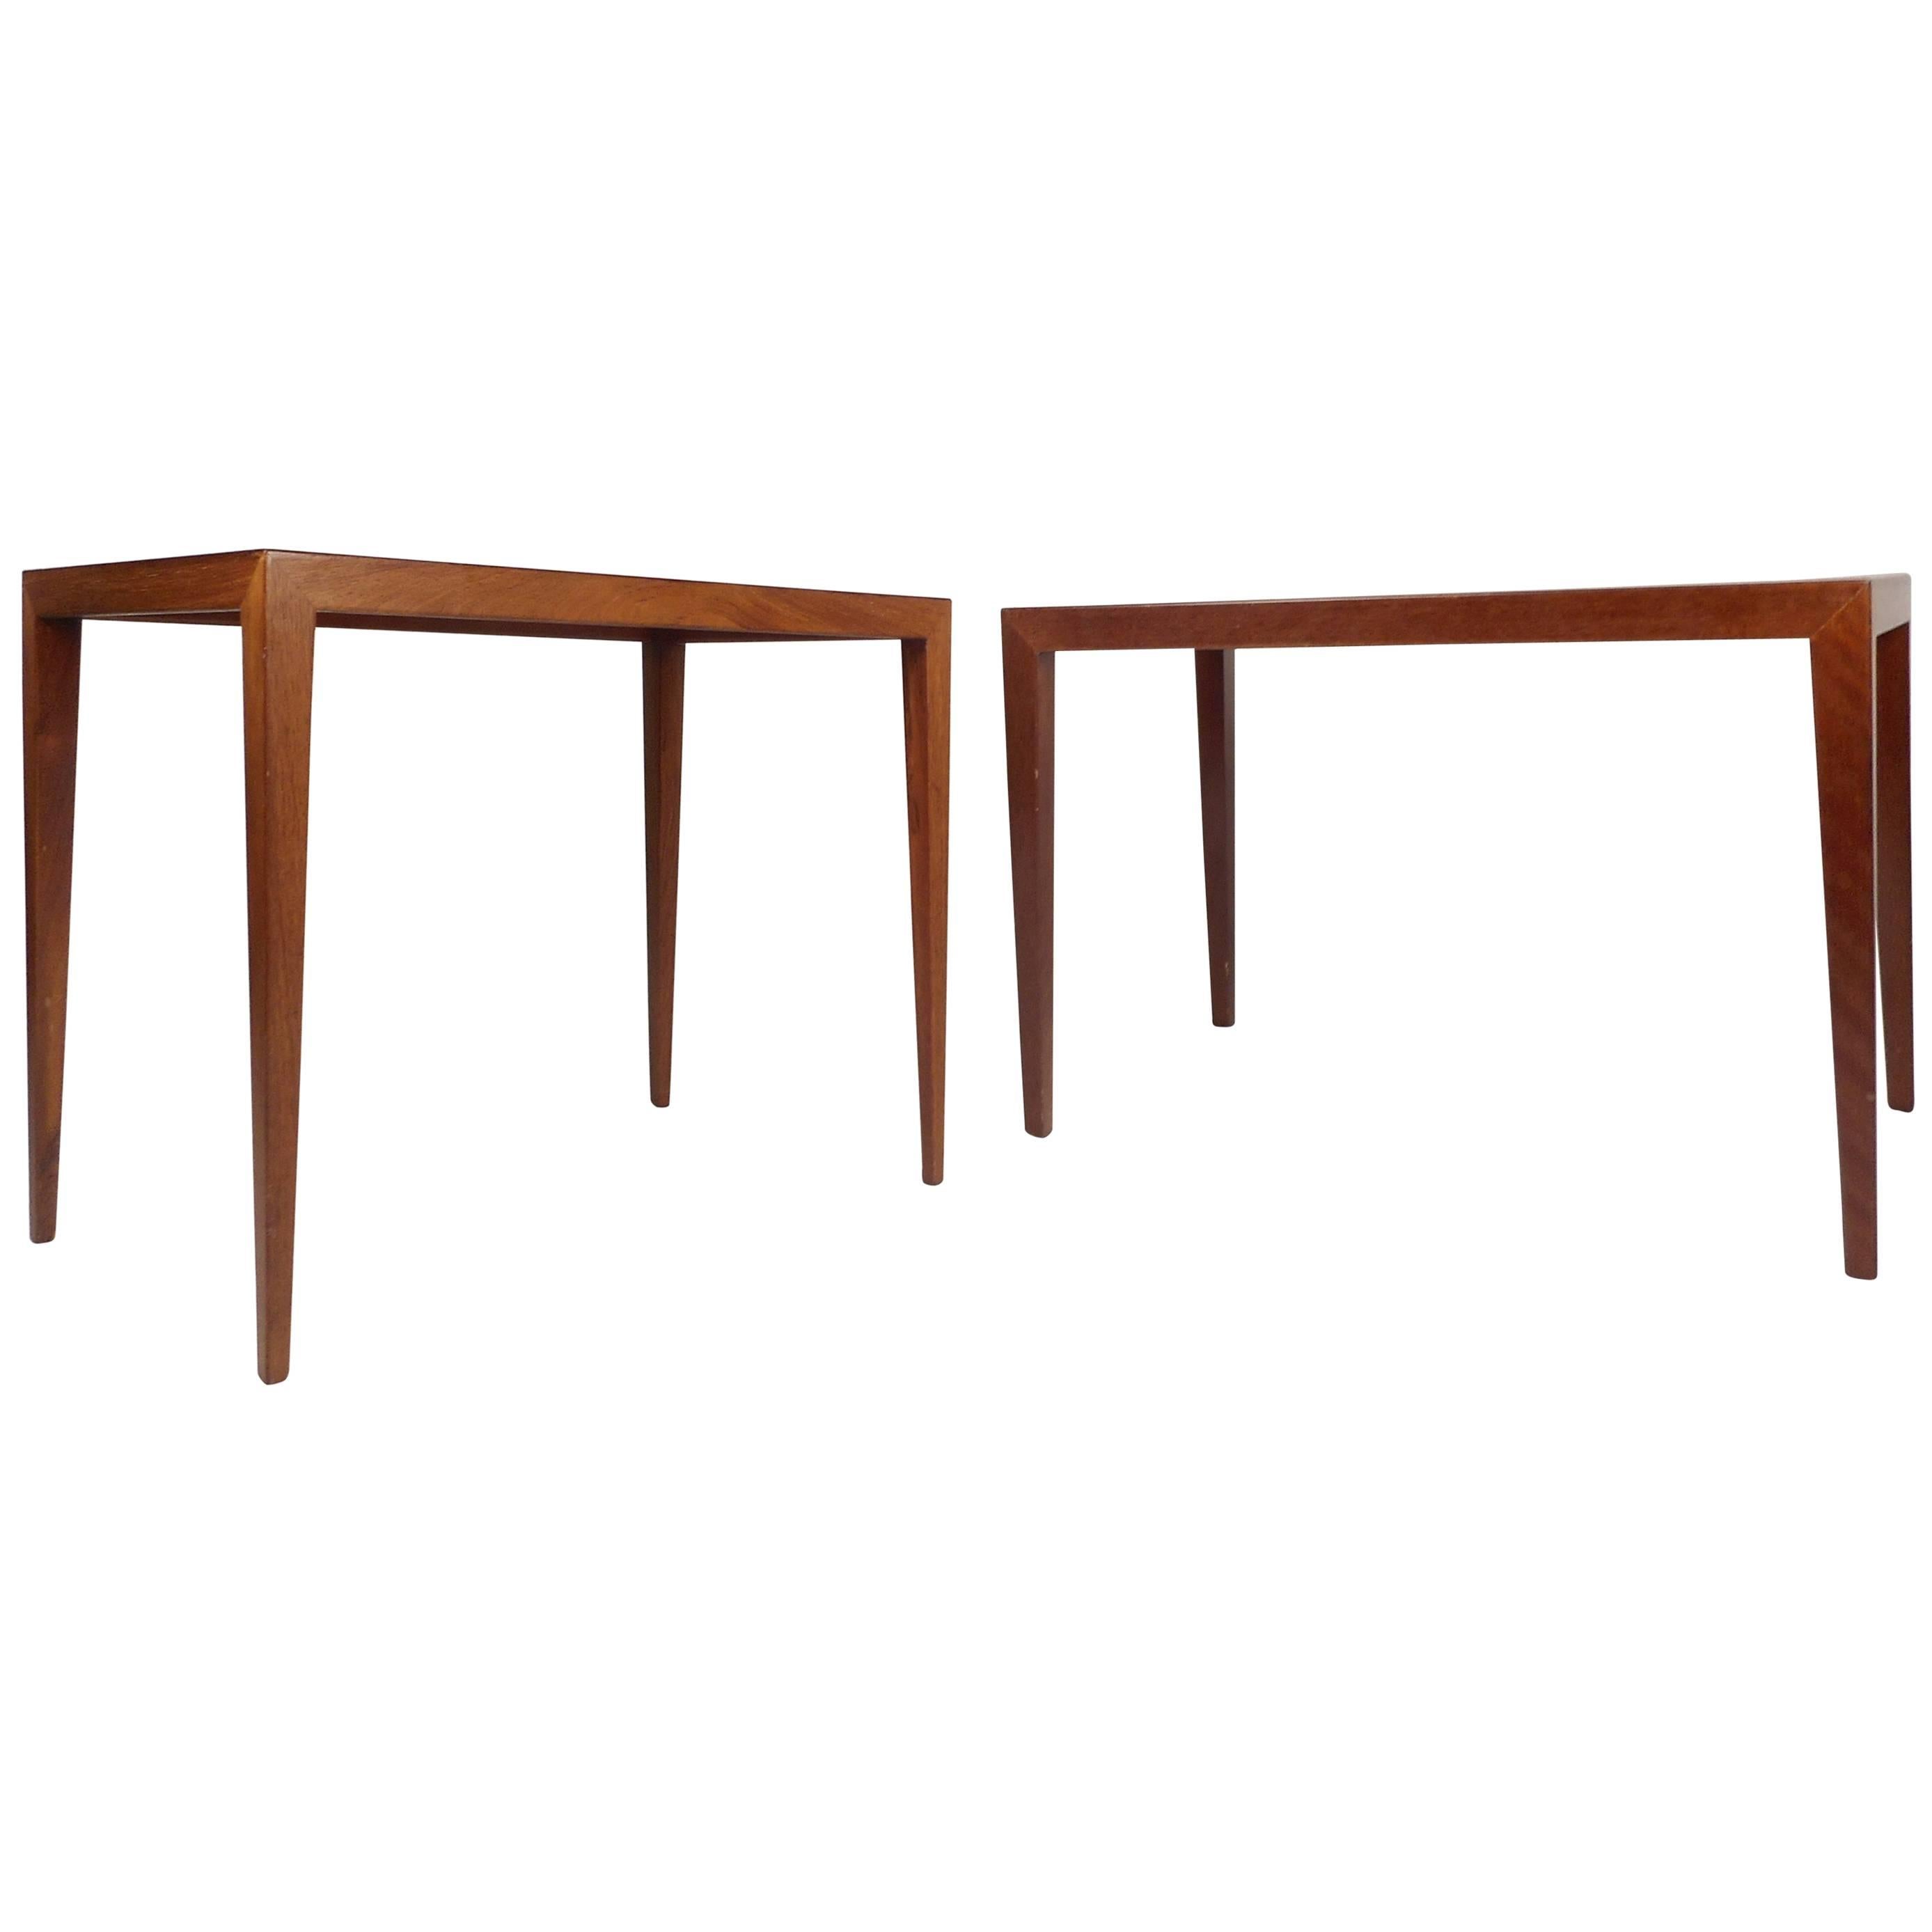 Pair of Midcentury Danish End Tables